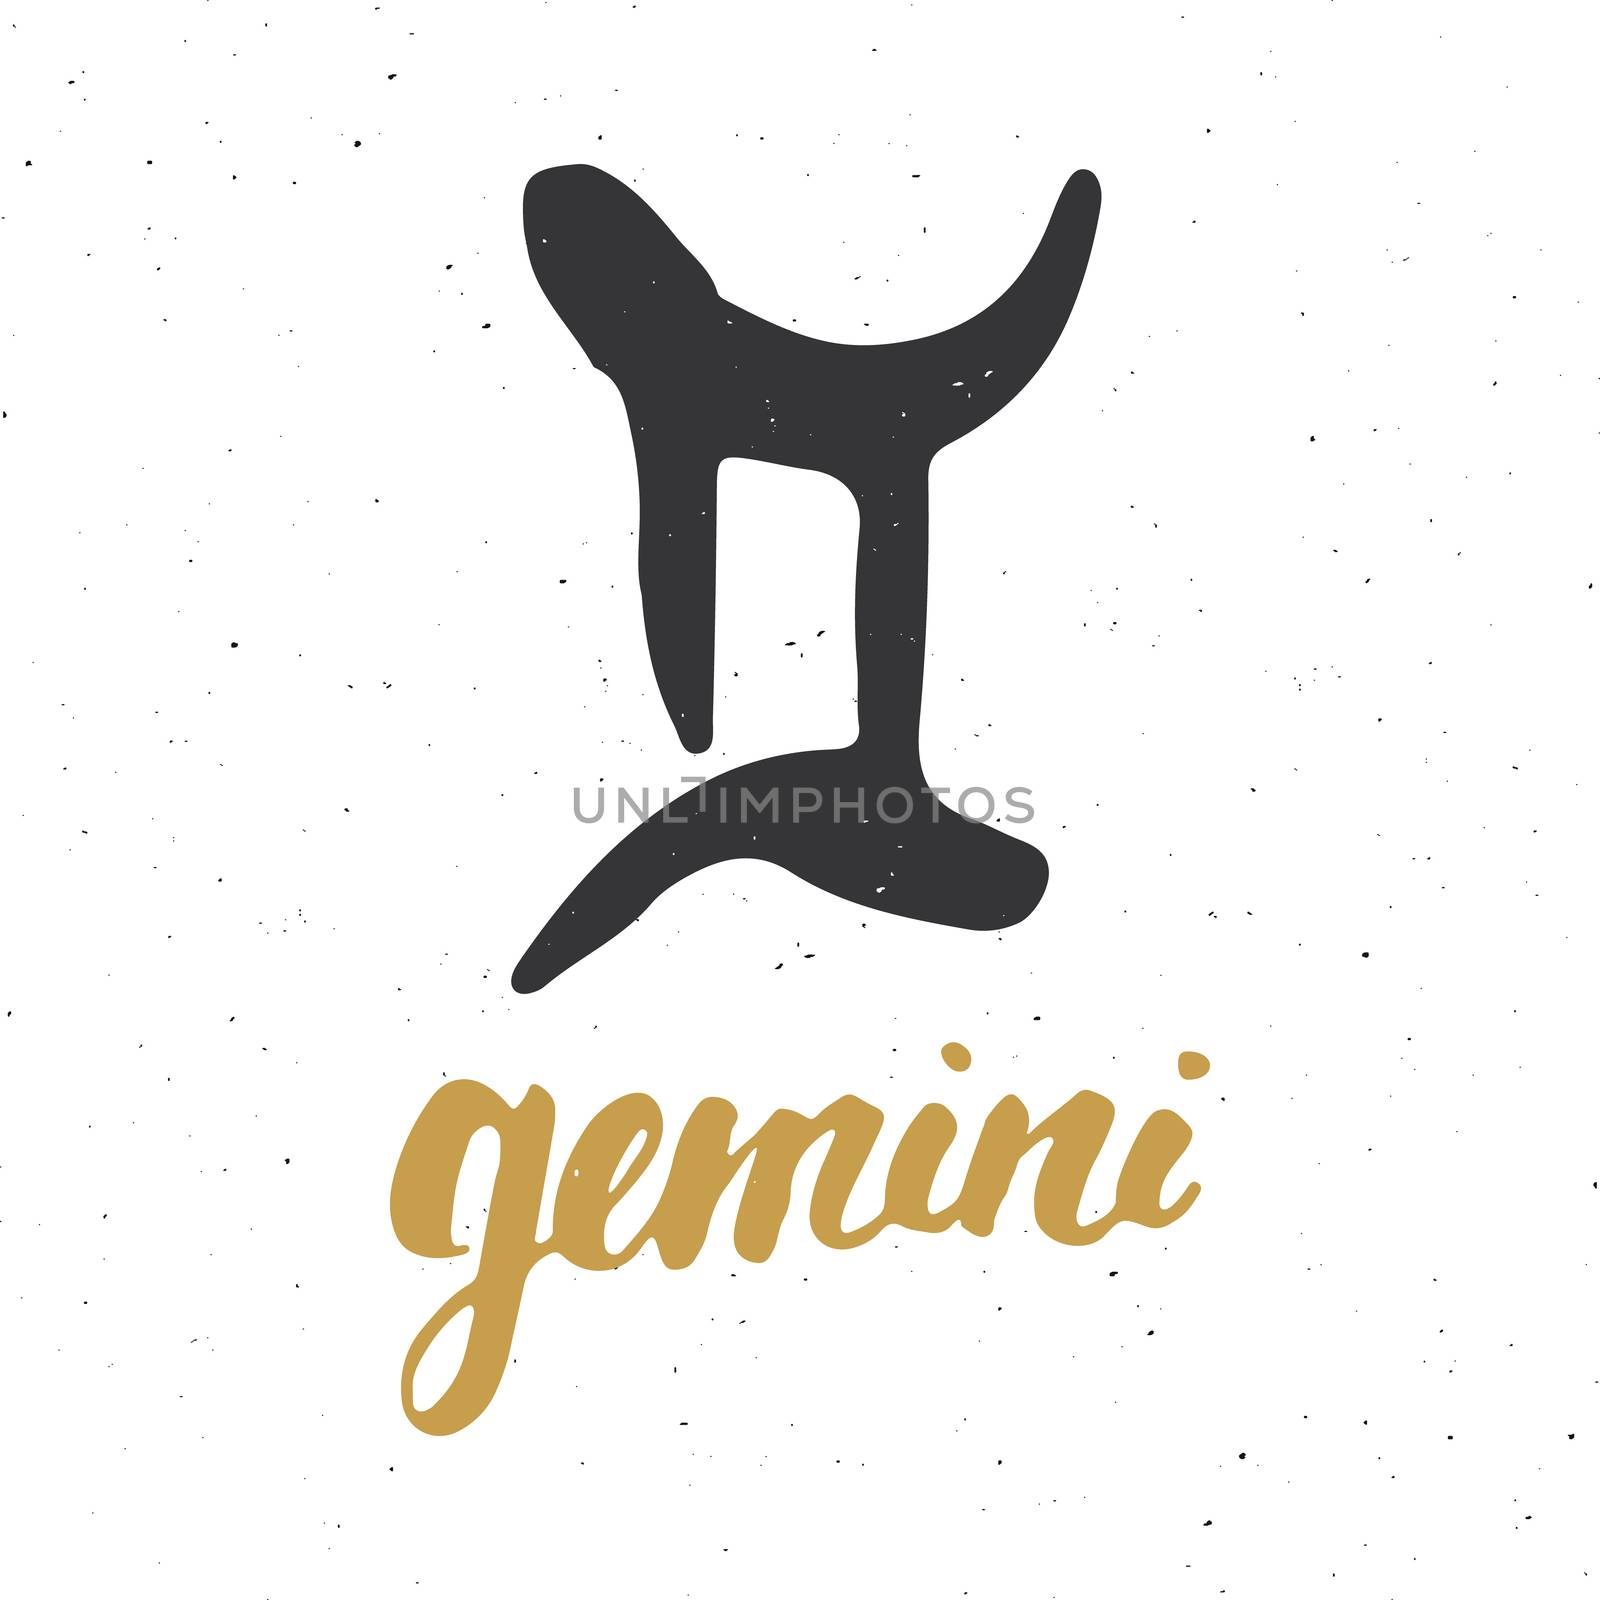 Zodiac sign Gemini and lettering. Hand drawn horoscope astrology symbol, grunge textured design, typography print, vector illustration .